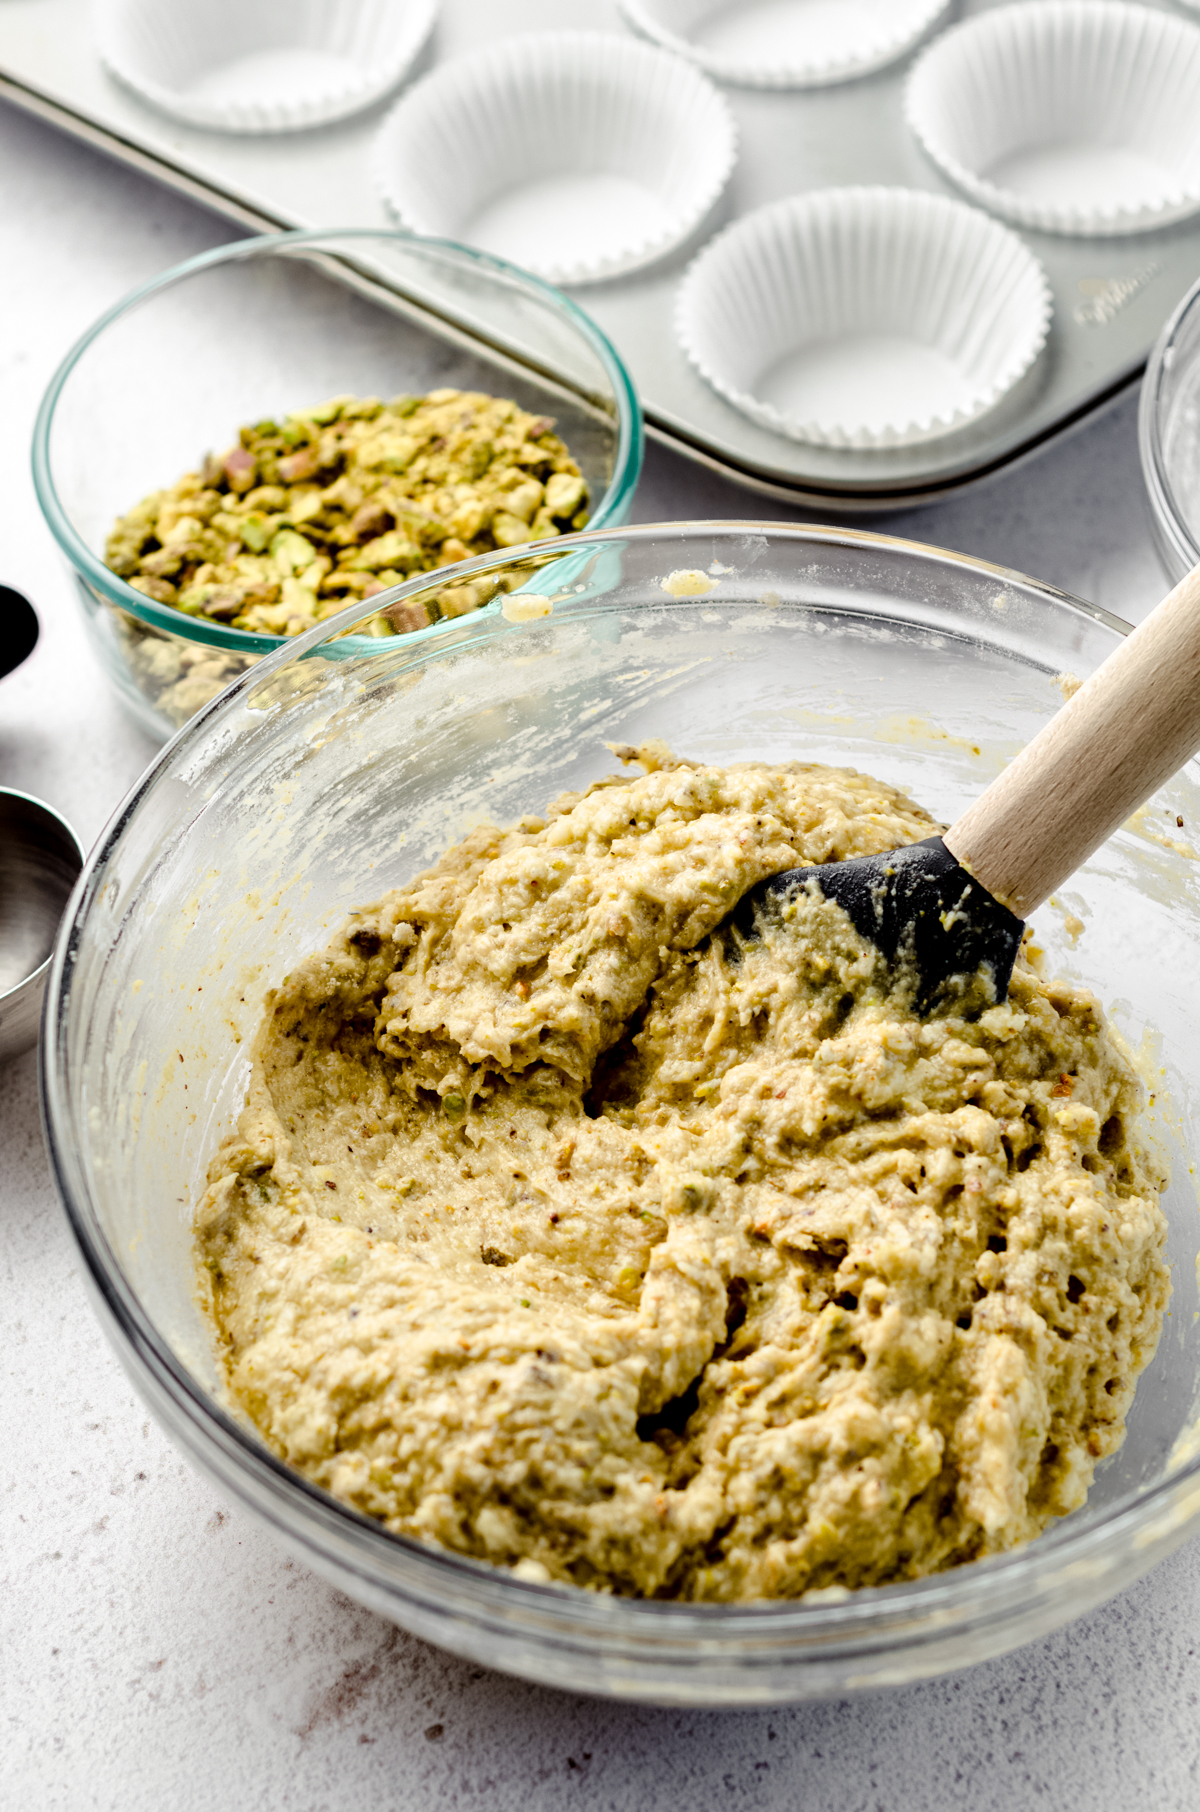 Pistachio muffin batter in a large glass bowl with a spatula.